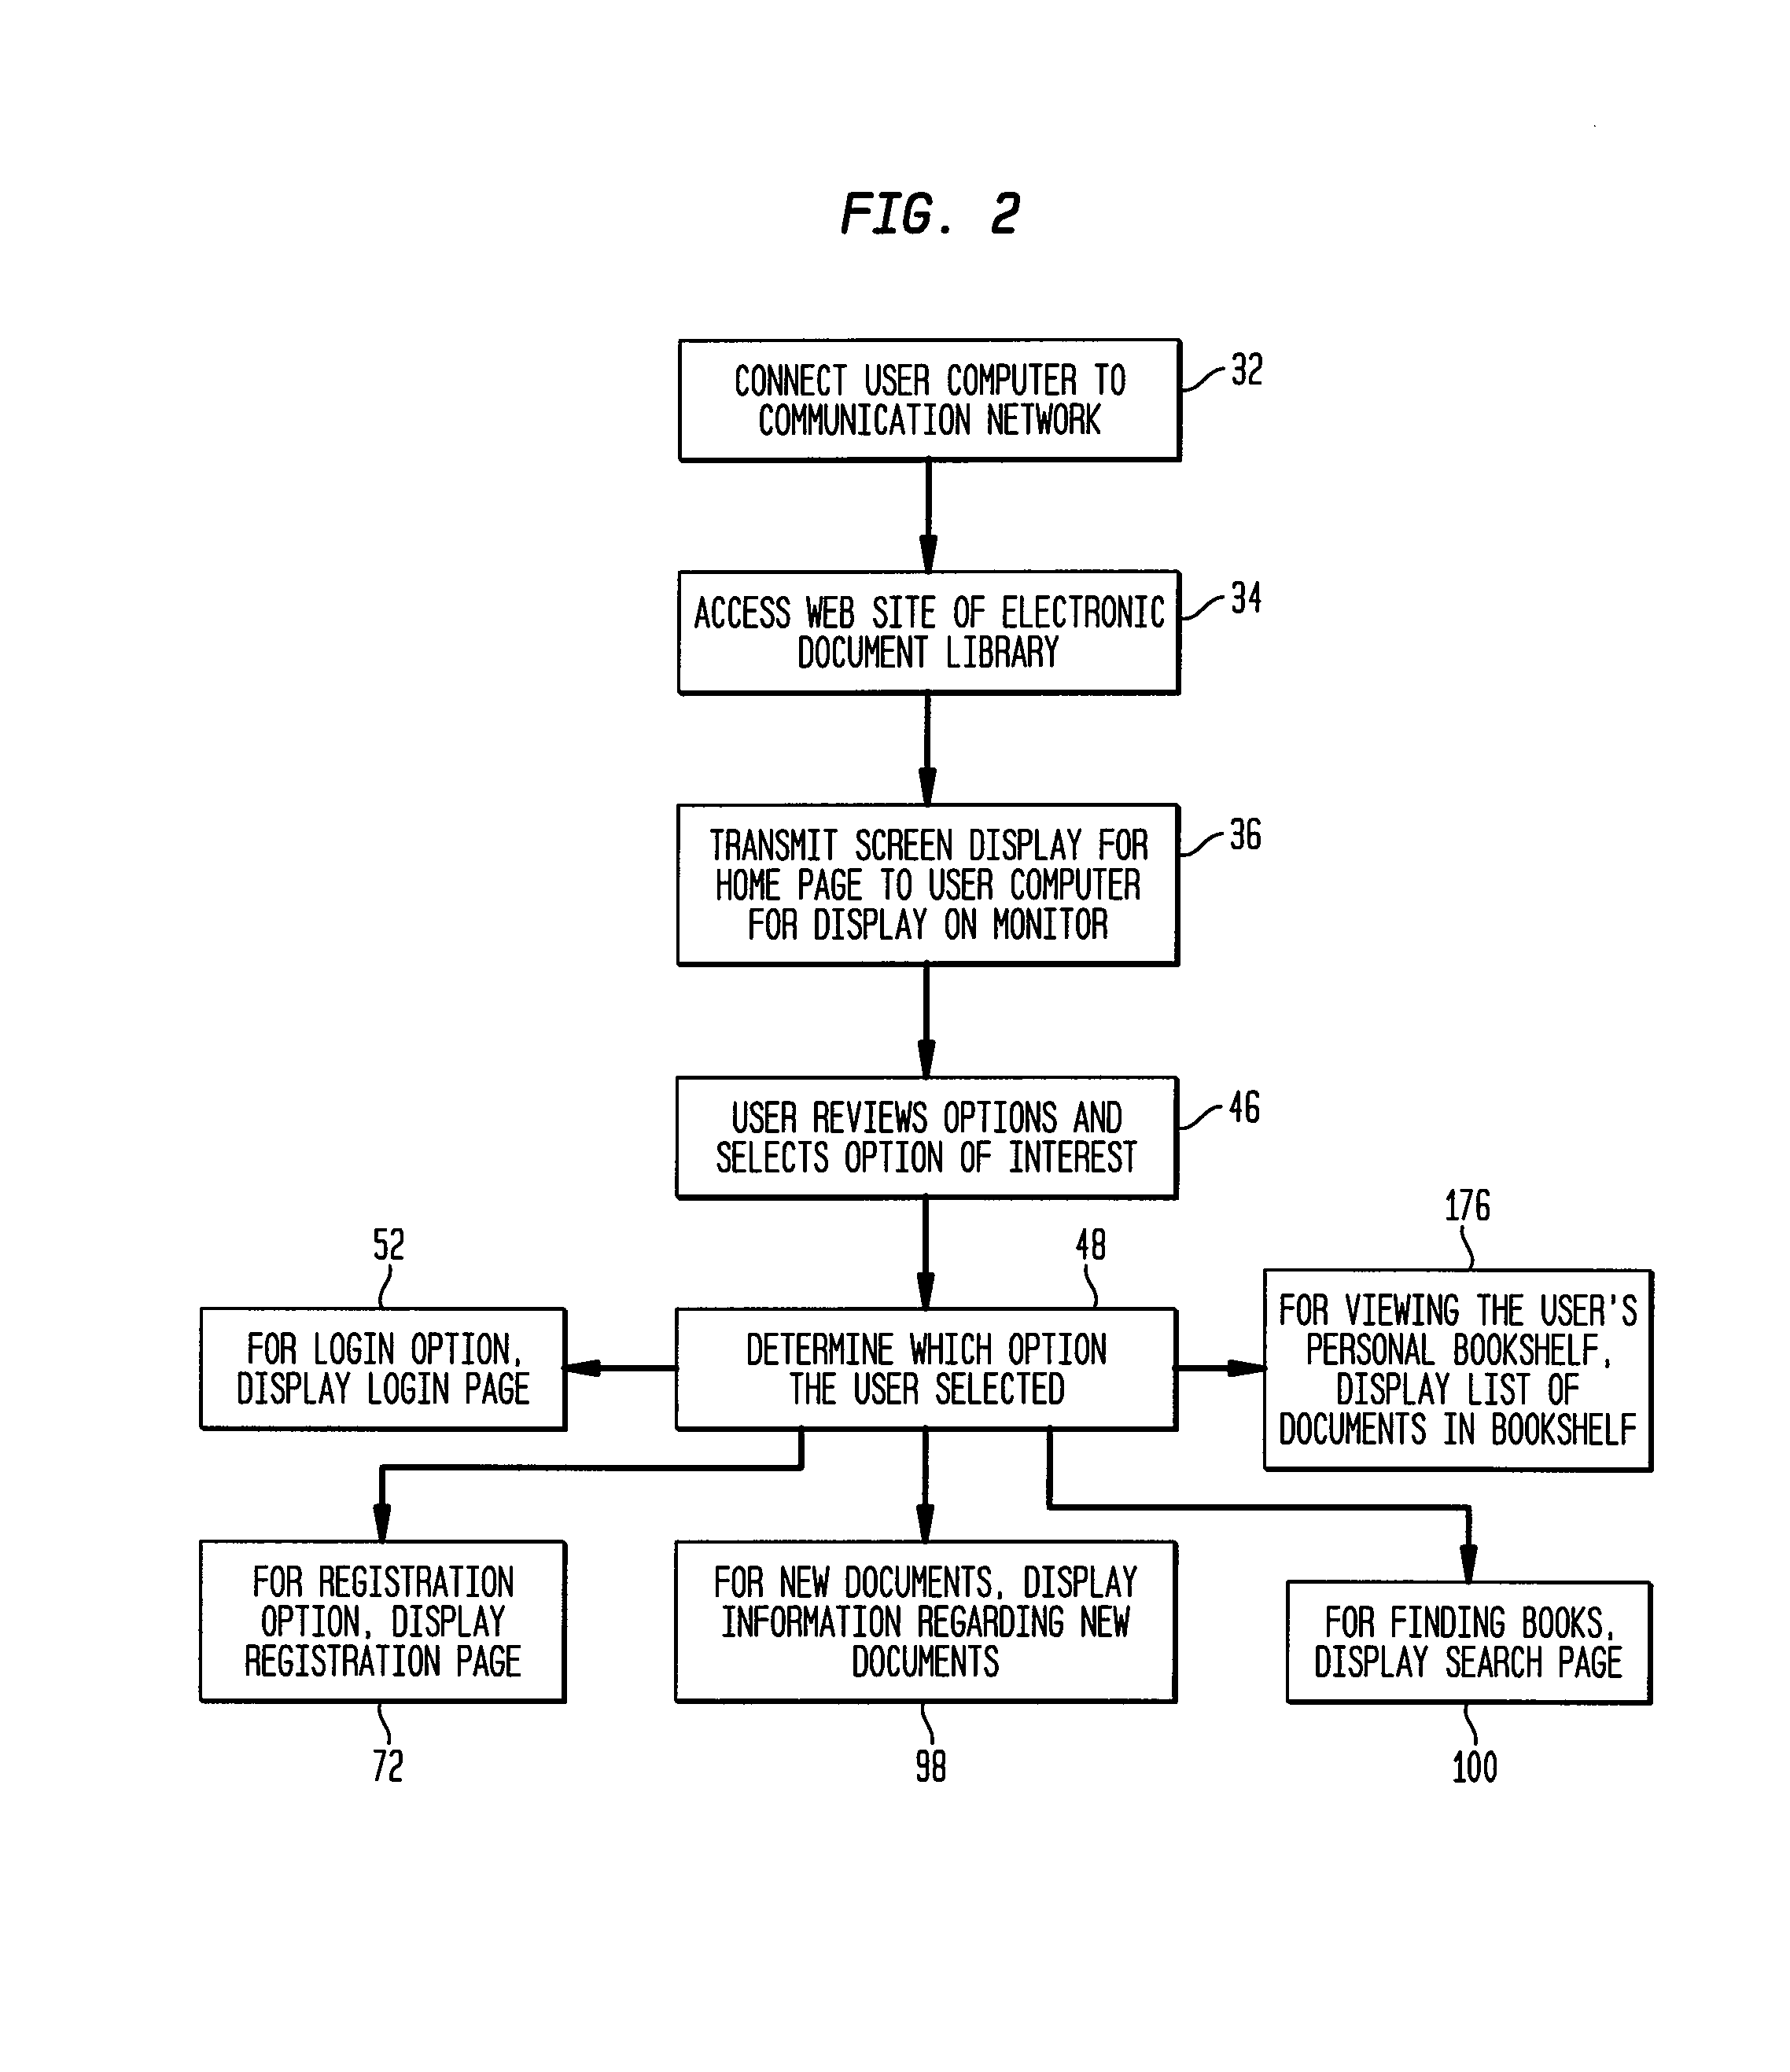 System and method for providing a searchable library of electronic documents to a user